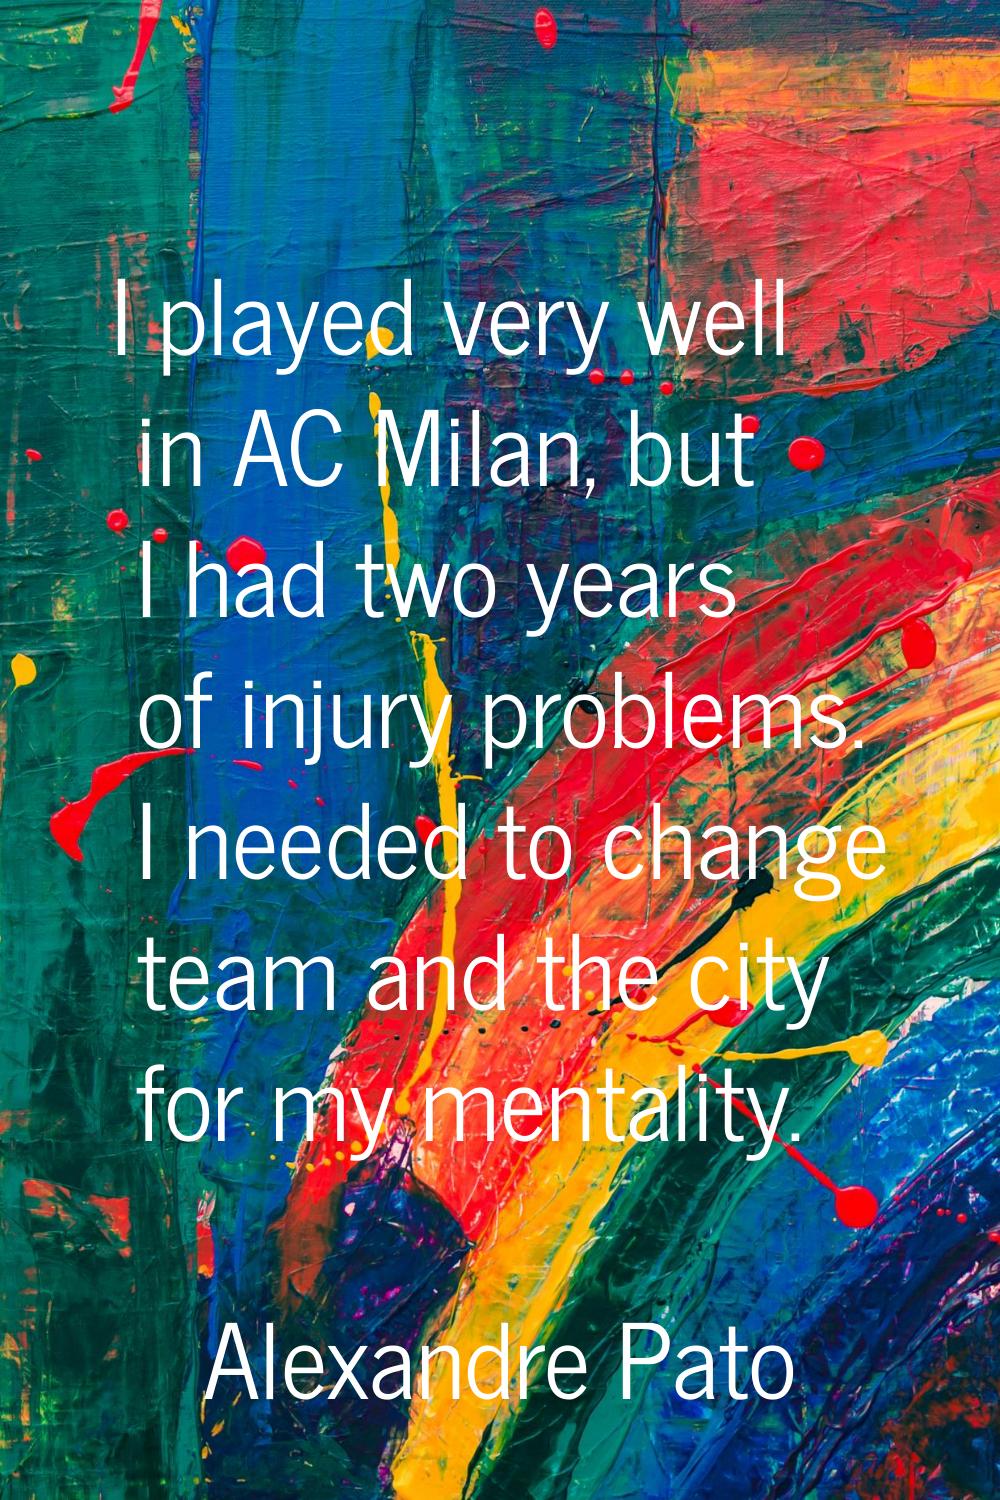 I played very well in AC Milan, but I had two years of injury problems. I needed to change team and